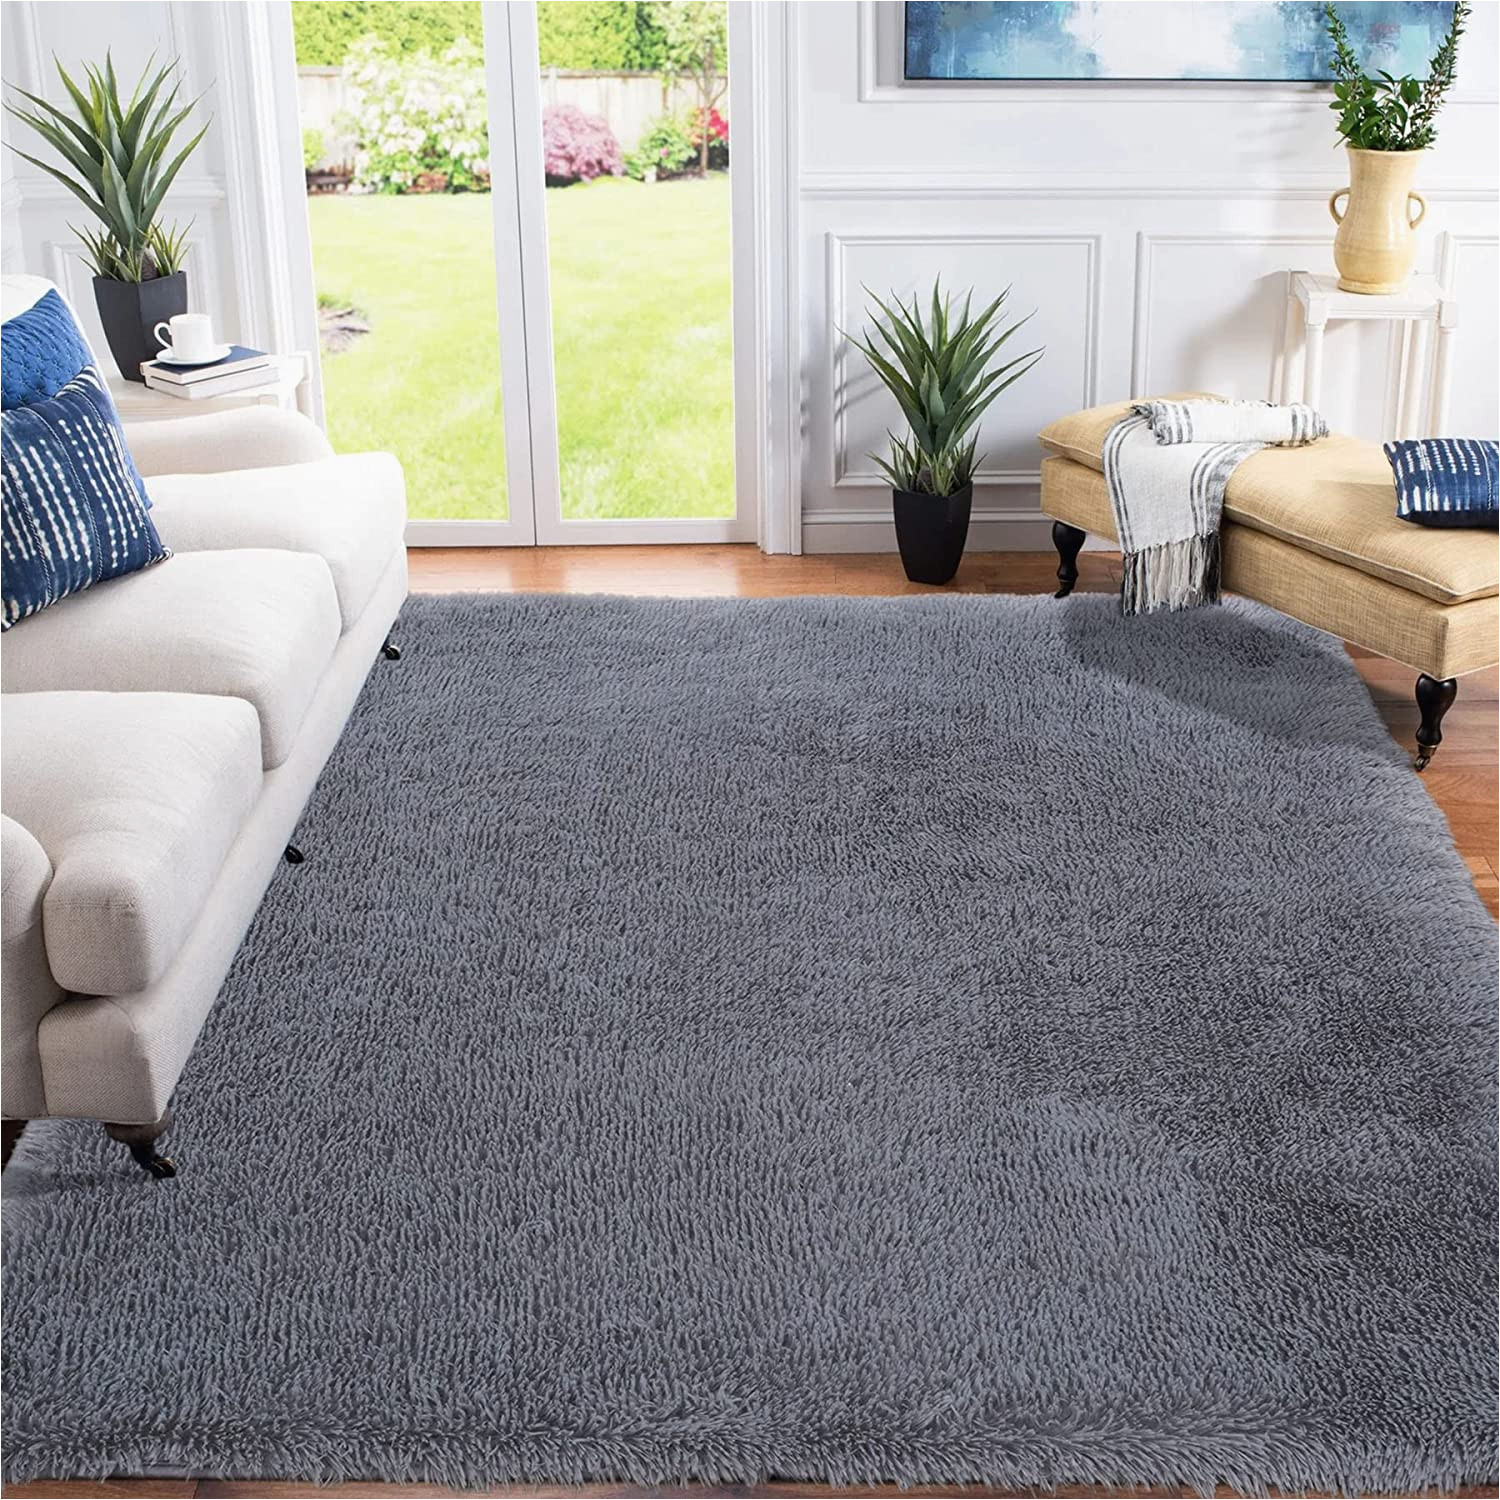 Rug and Home area Rugs Xsivod Large Grey Rug Living Room, Ultra soft Bedroom Rugs area Rugs for Living Room Floor Carpet, Luxury Fluffy Shag Lounge Rug Ideal for Bedroom, …